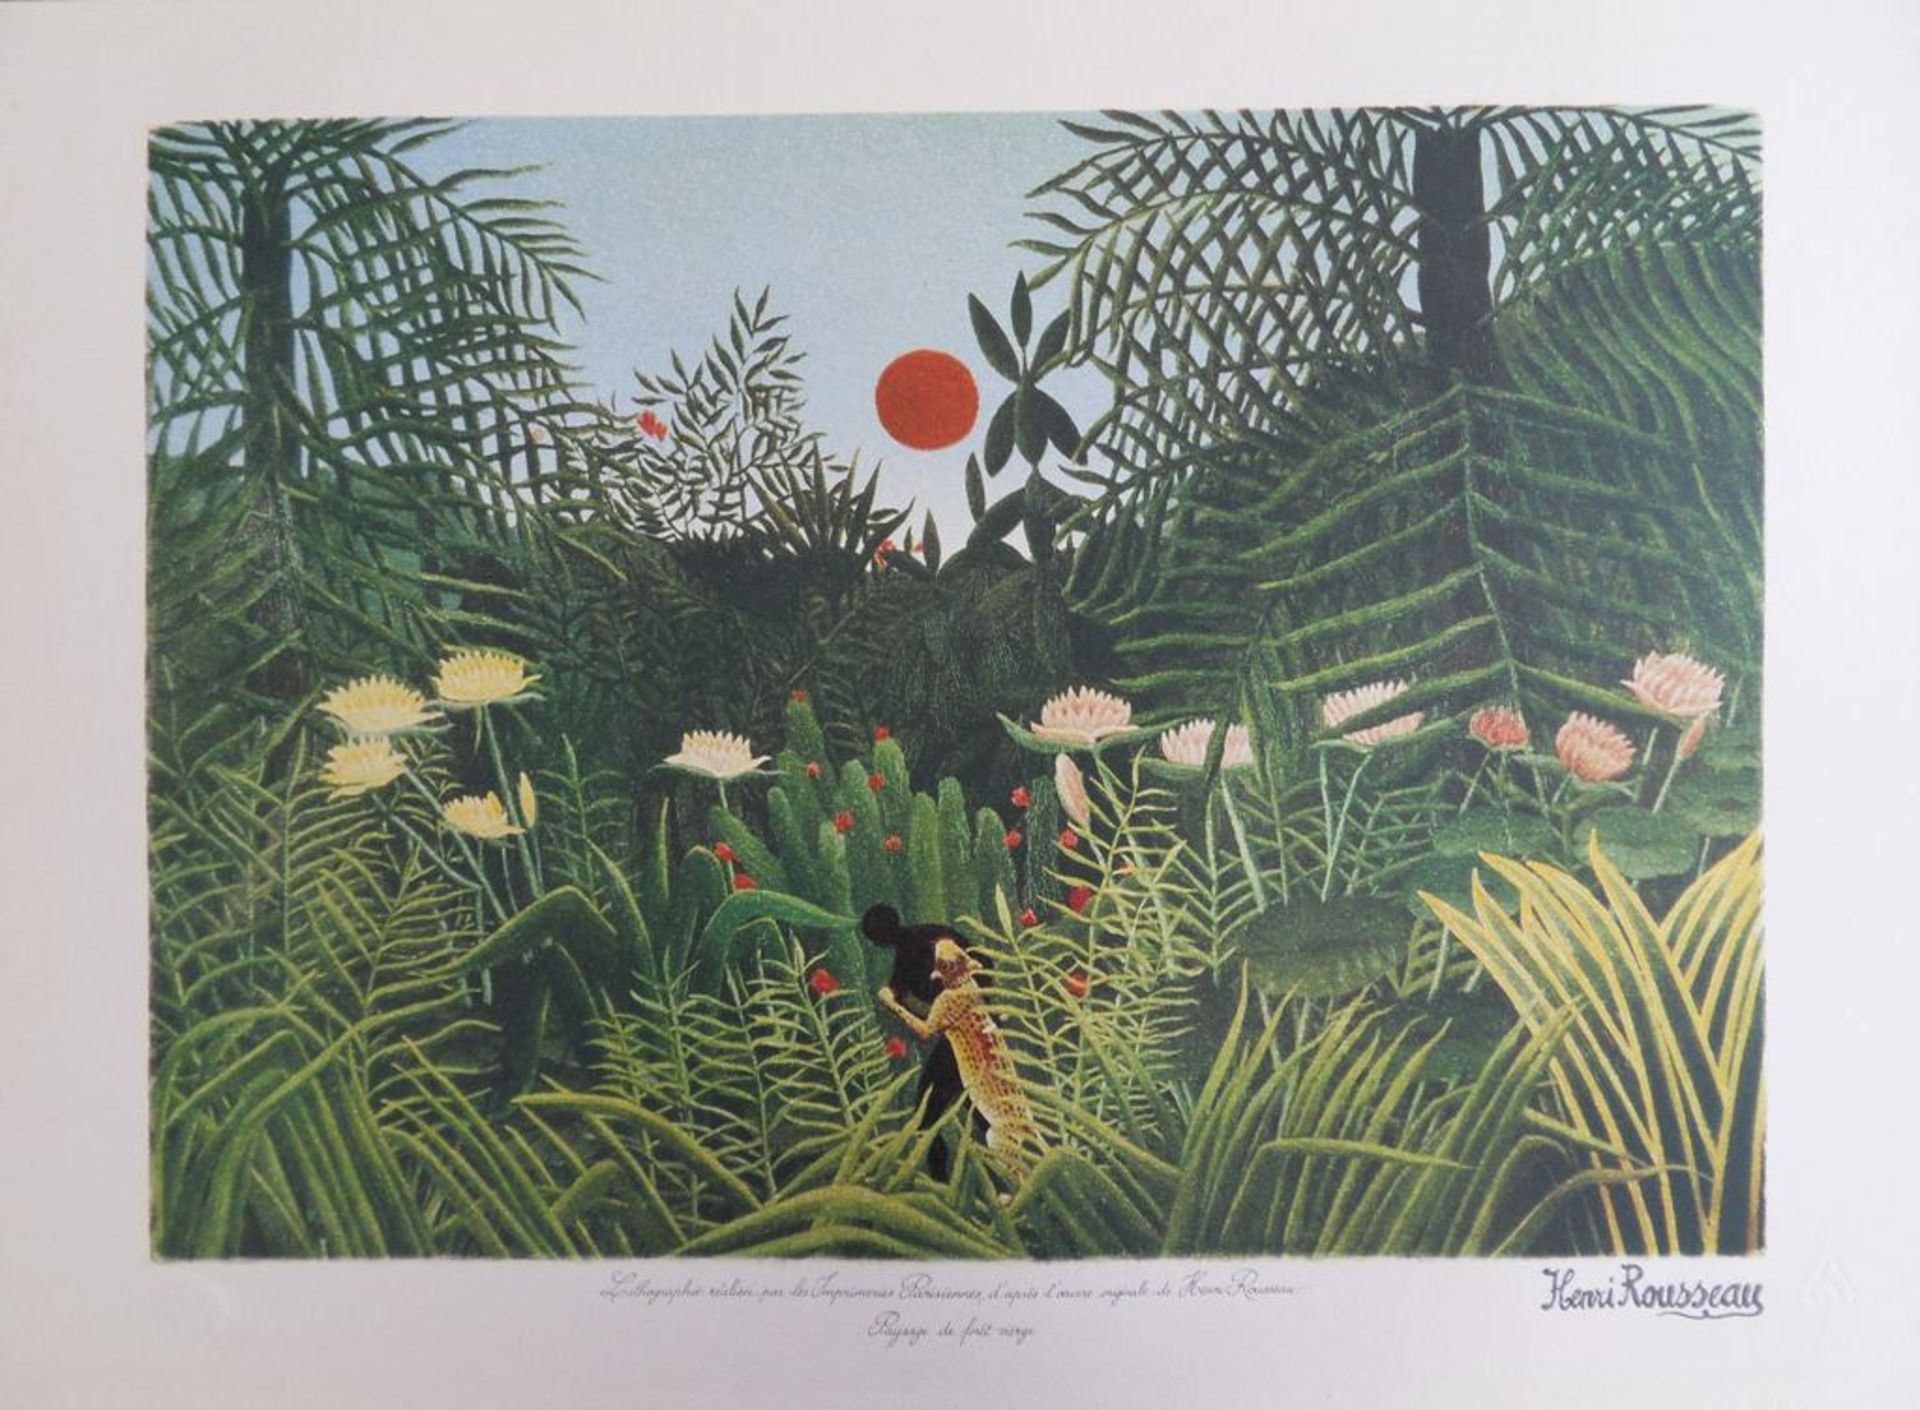 Le Douanier ROUSSEAU (Henri) Lithograph signed and numbered- 300ex Rainforest [...]